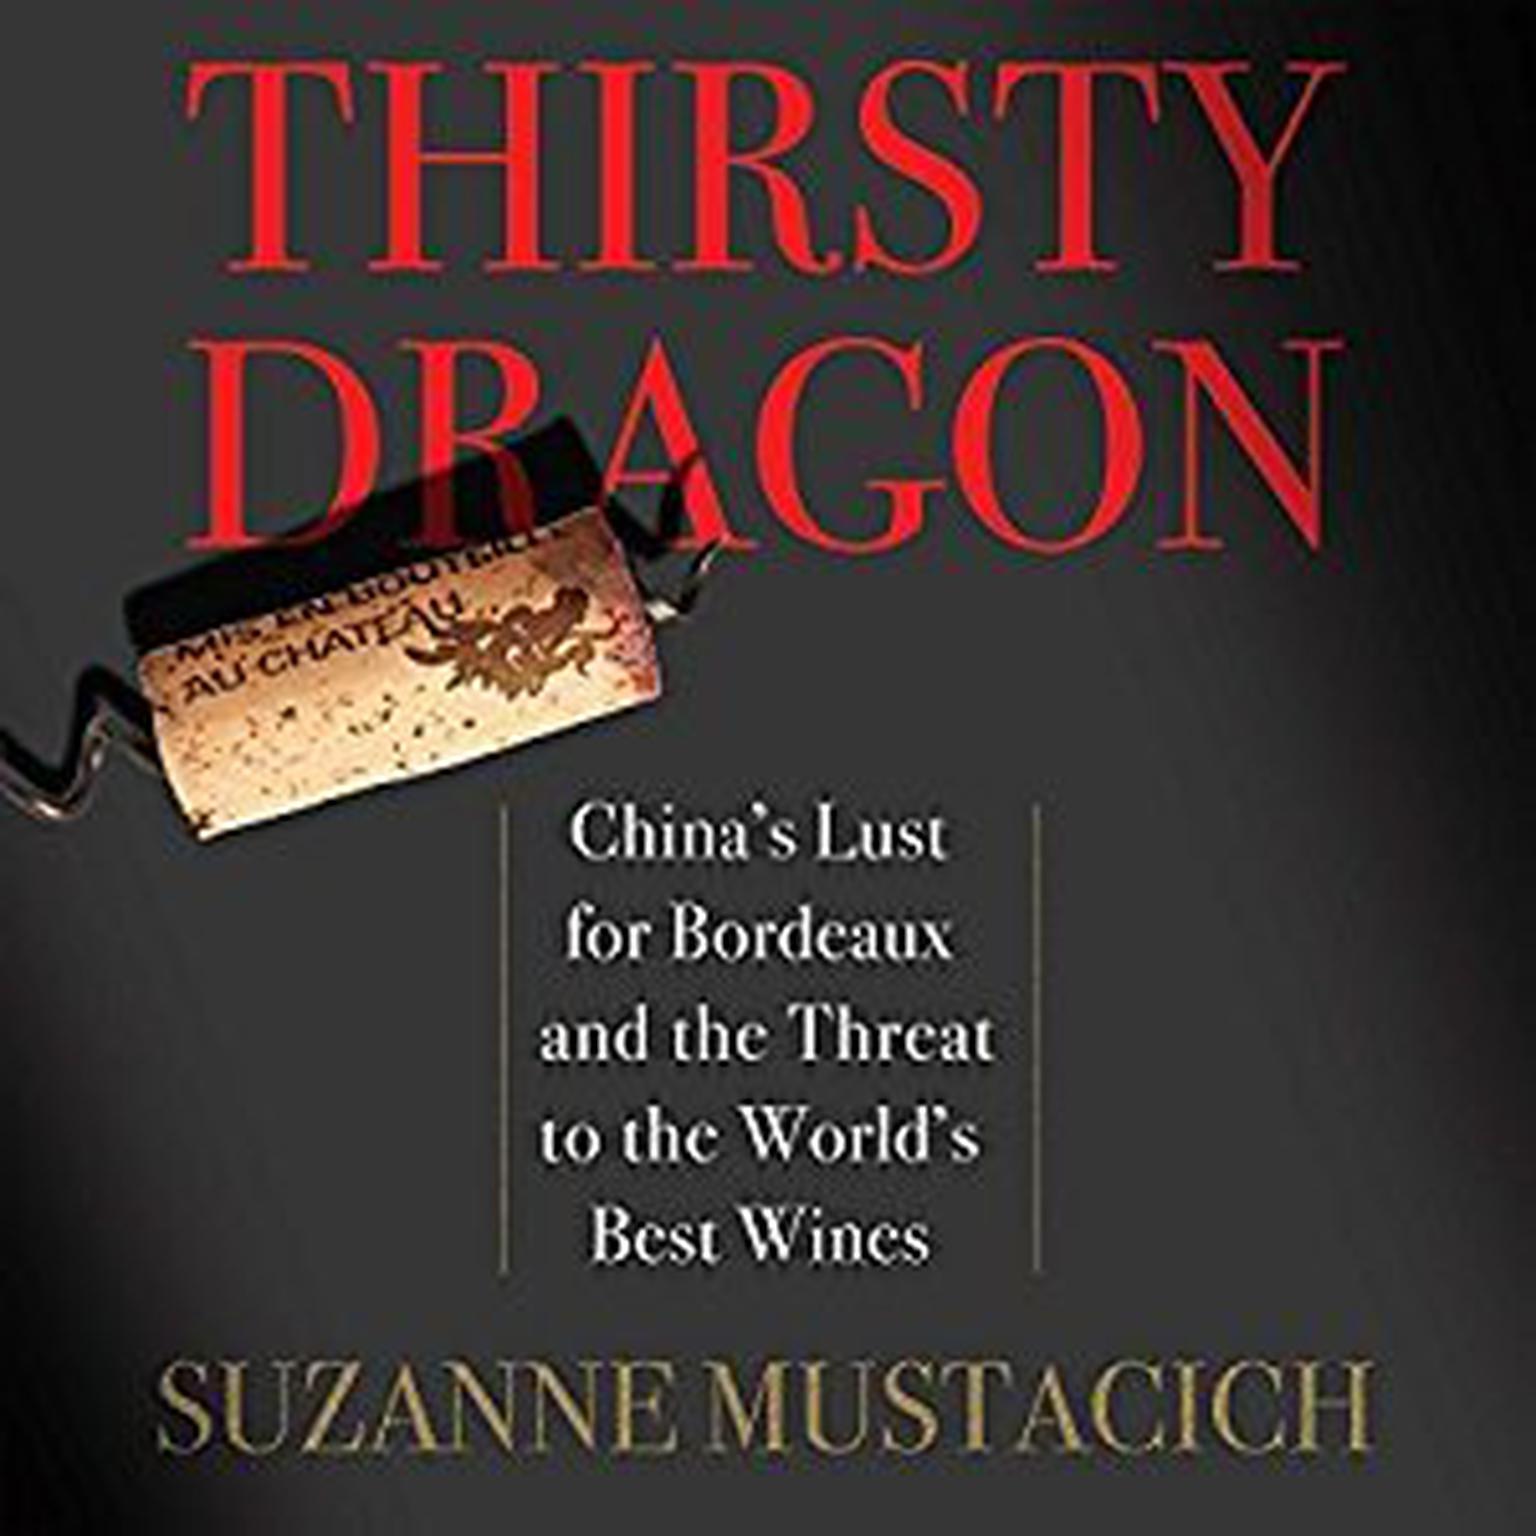 Thirsty Dragon: Chinas Lust for Bordeaux and the Threat to the Worlds Best Wines Audiobook, by Suzanne Mustacich